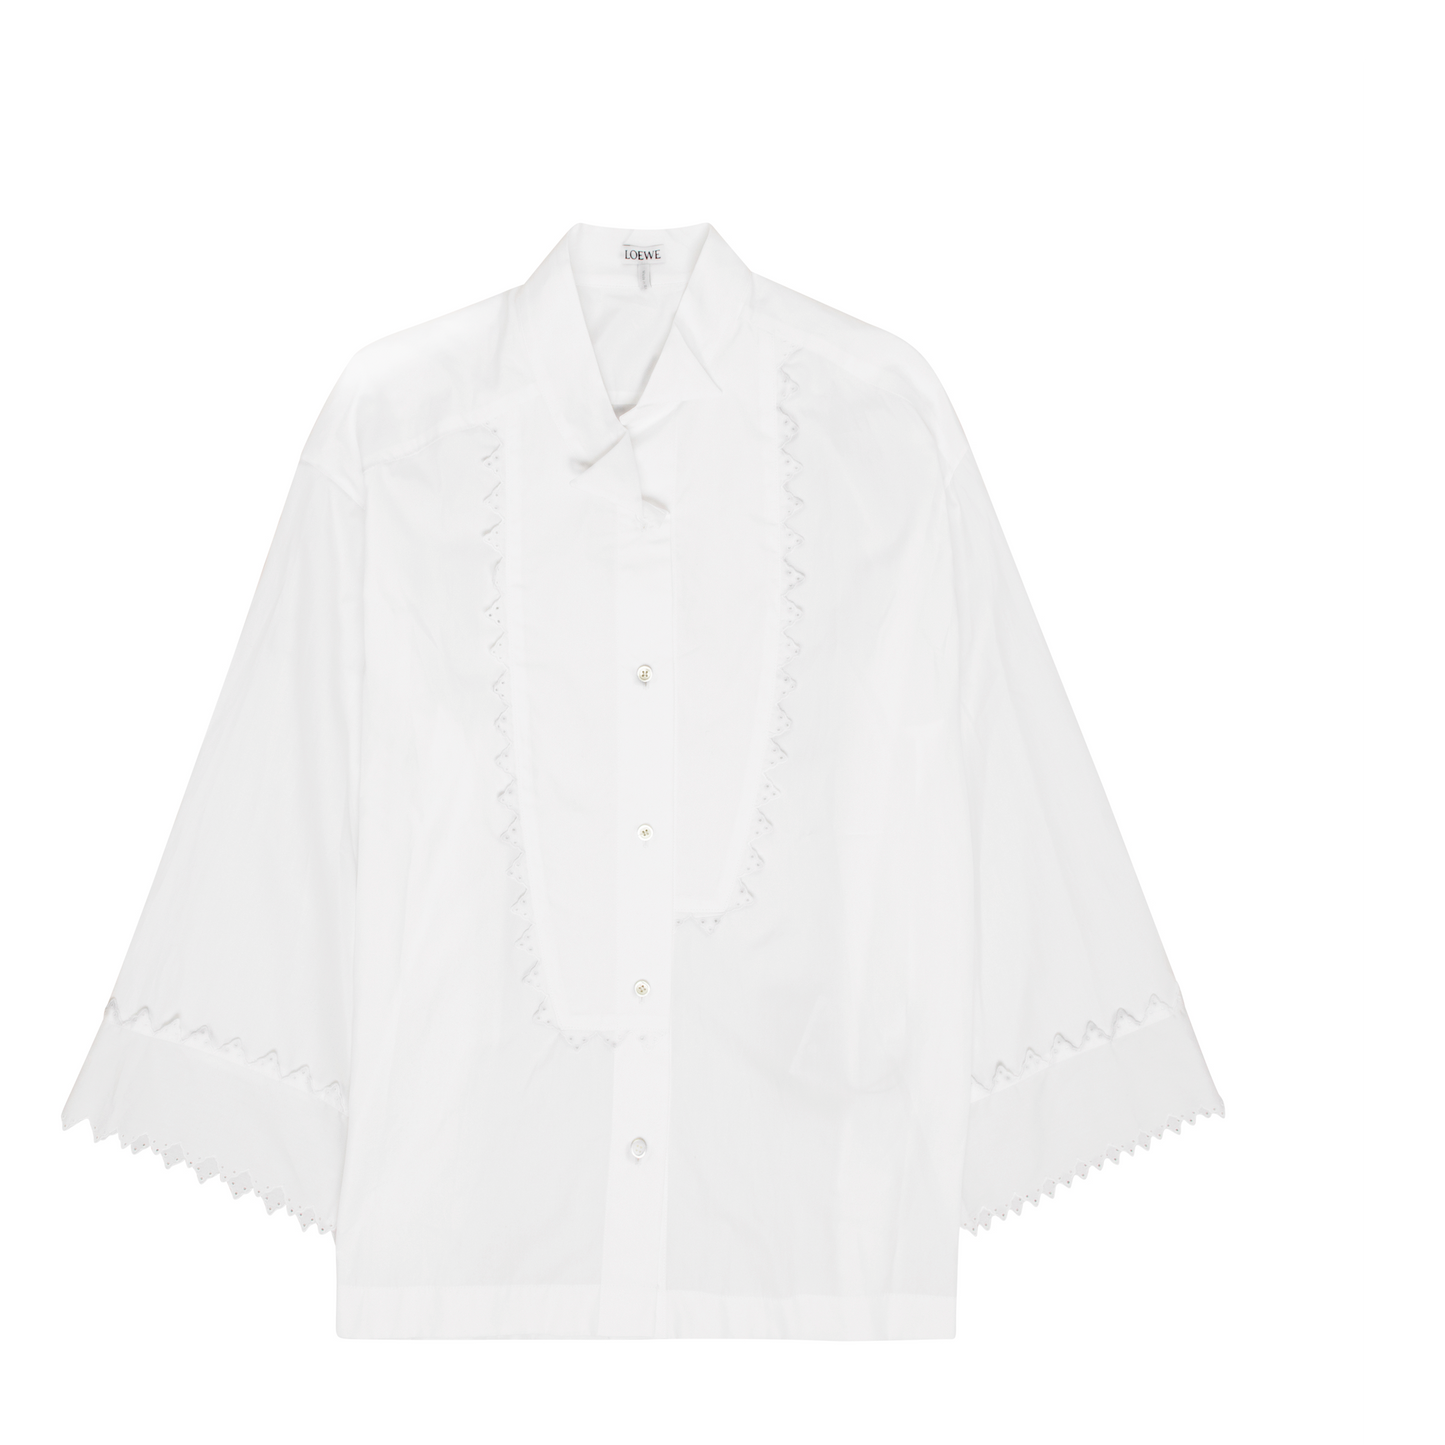 Lace Trim Asymetric Oversize Shirt in White